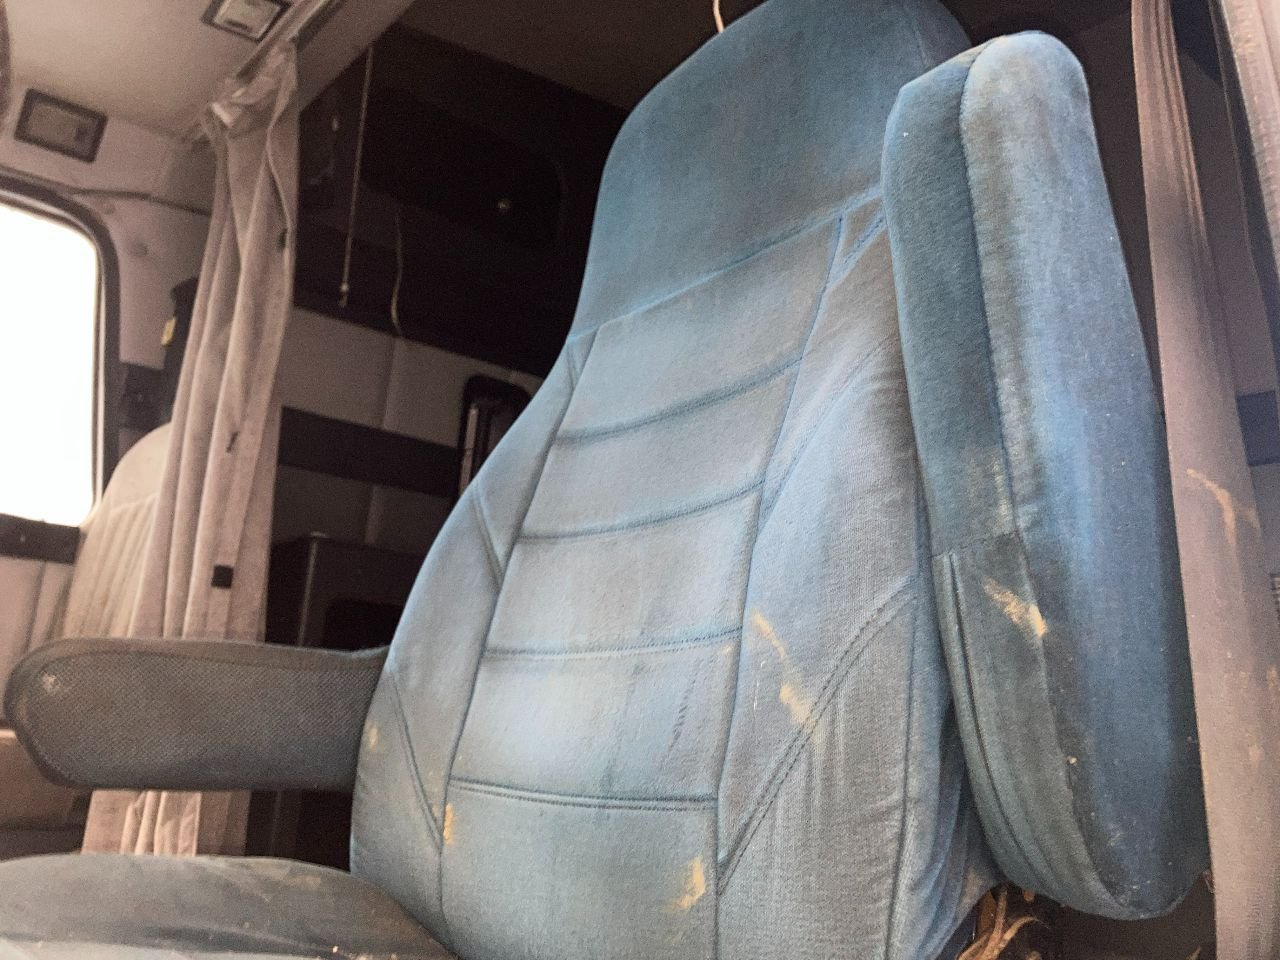 Volvo Air Ride Seats for Sale